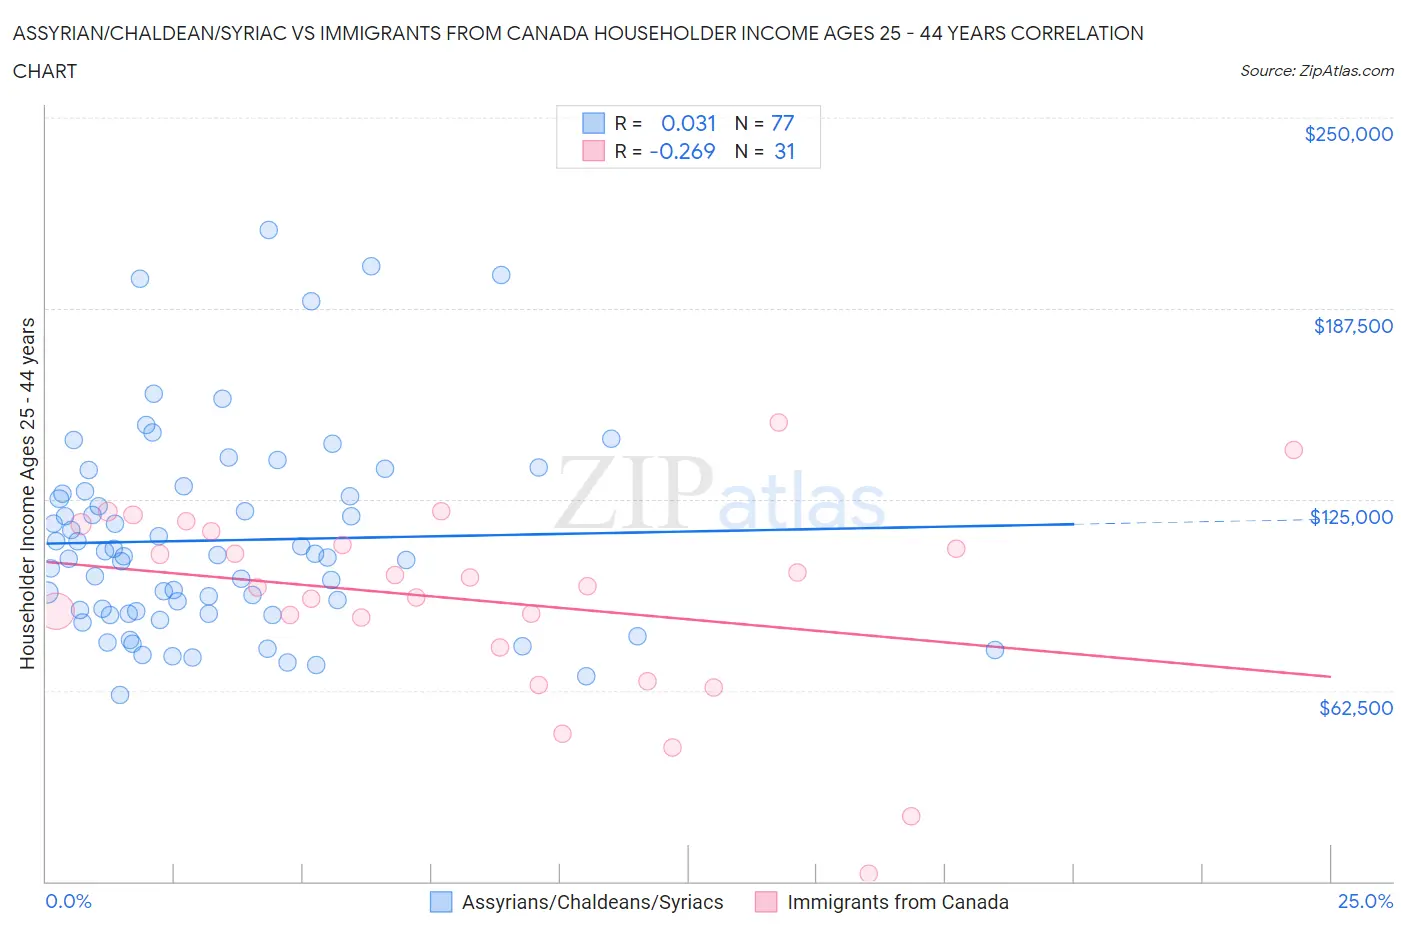 Assyrian/Chaldean/Syriac vs Immigrants from Canada Householder Income Ages 25 - 44 years